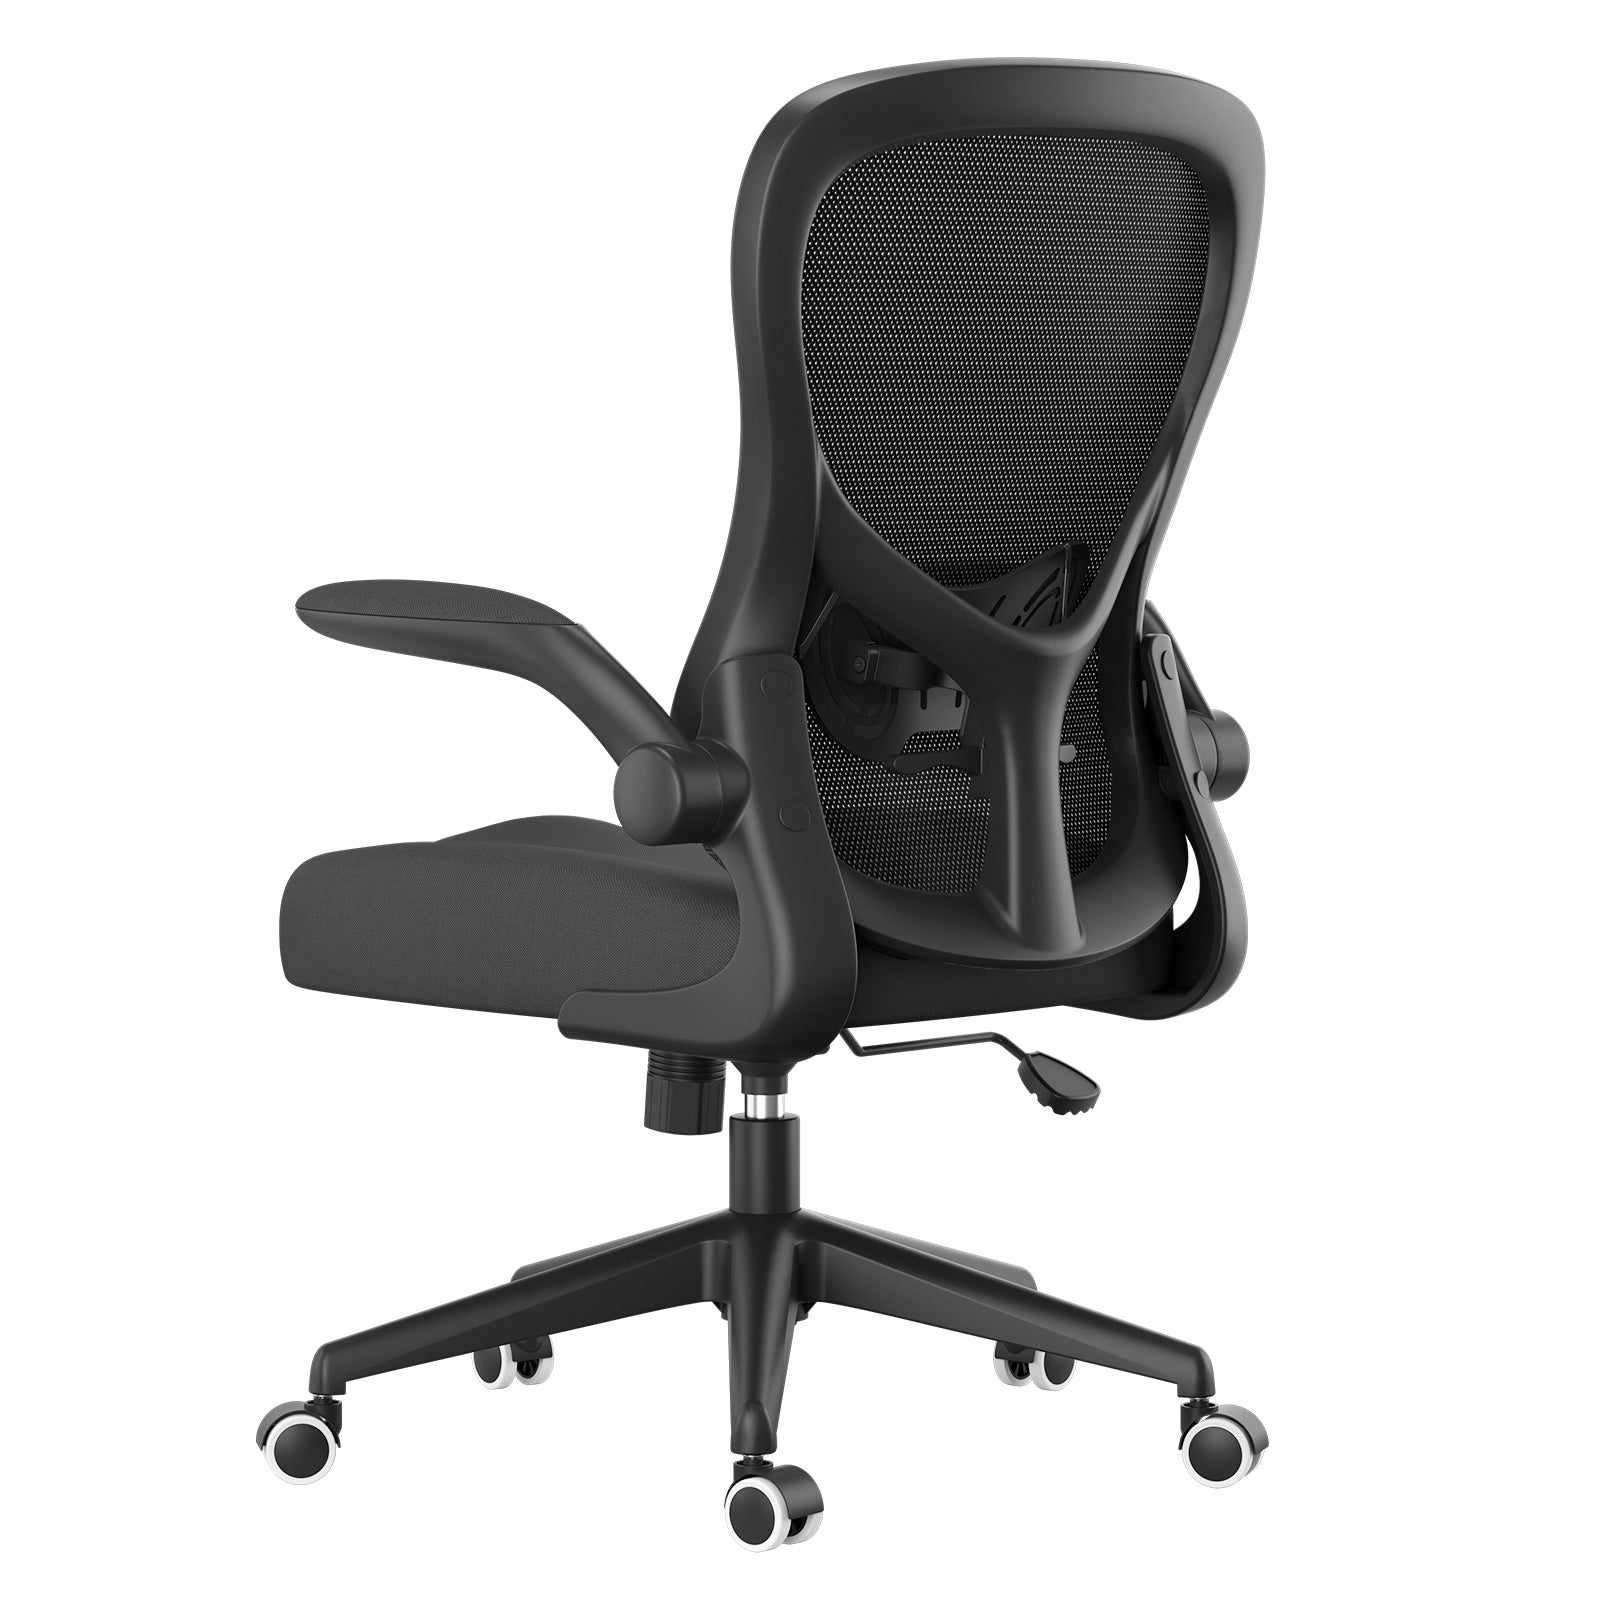 HBADA Butterfly Office Chair, Black Color